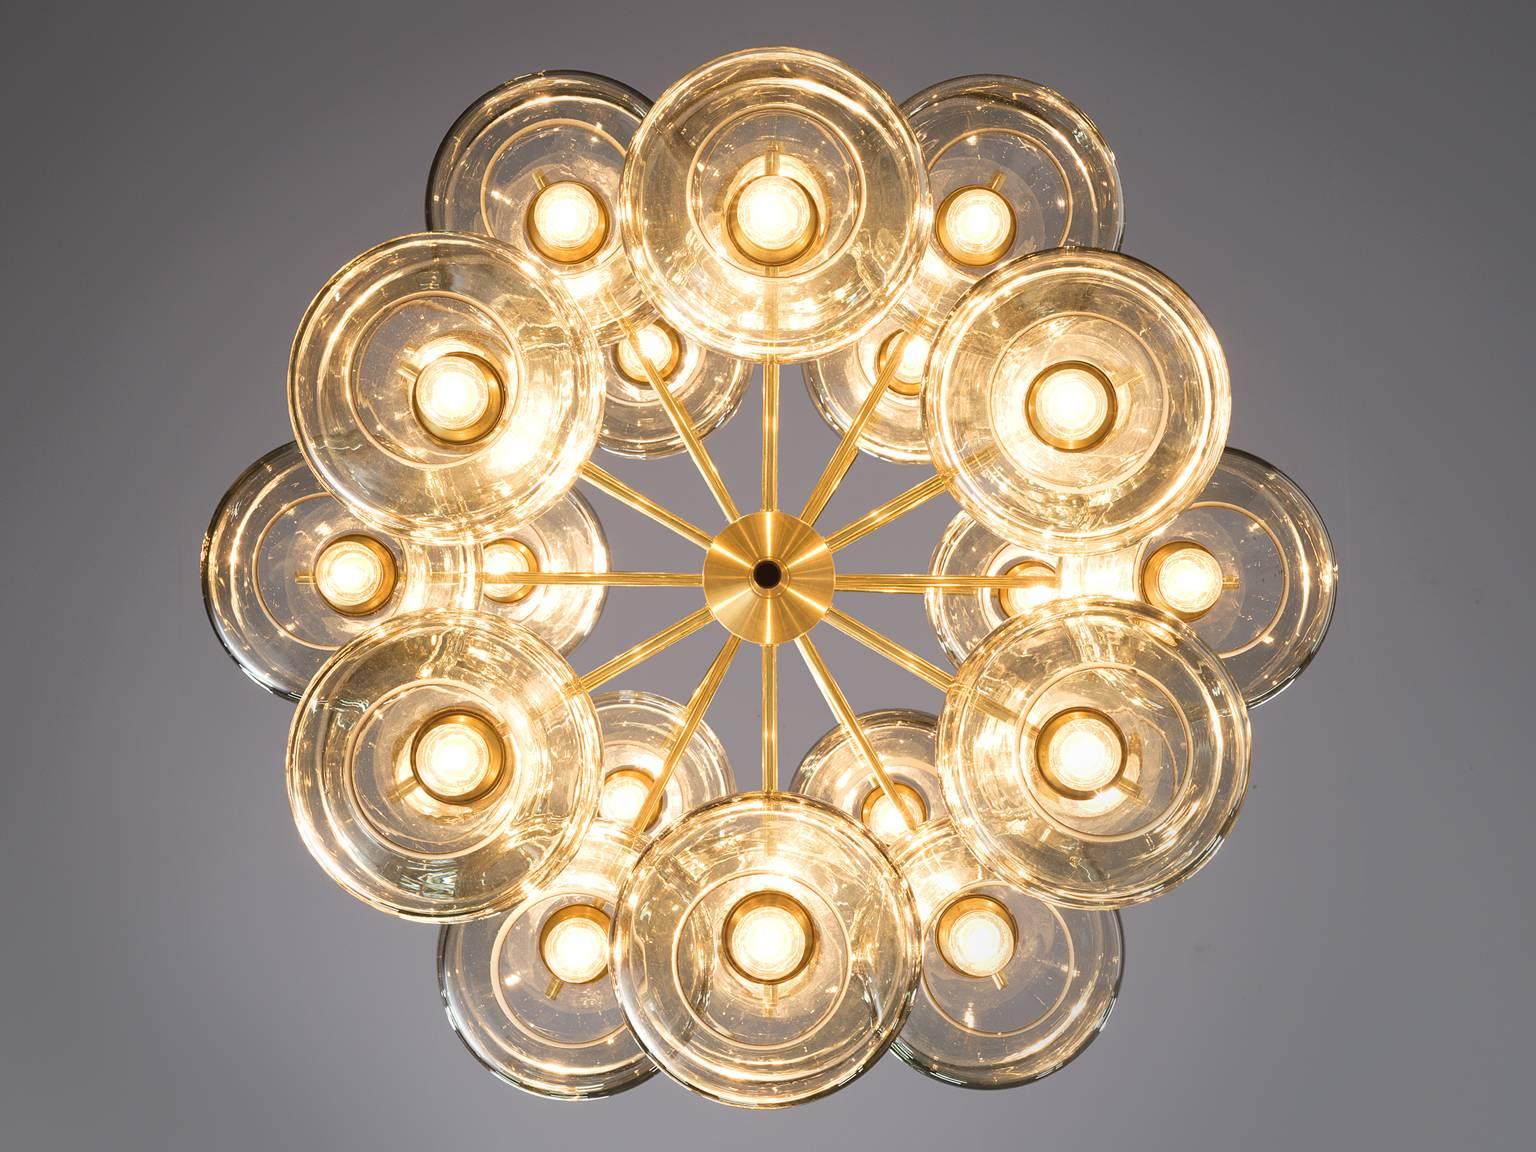 Large Swedish Chandeliers by Holger Johansson, 1952 1